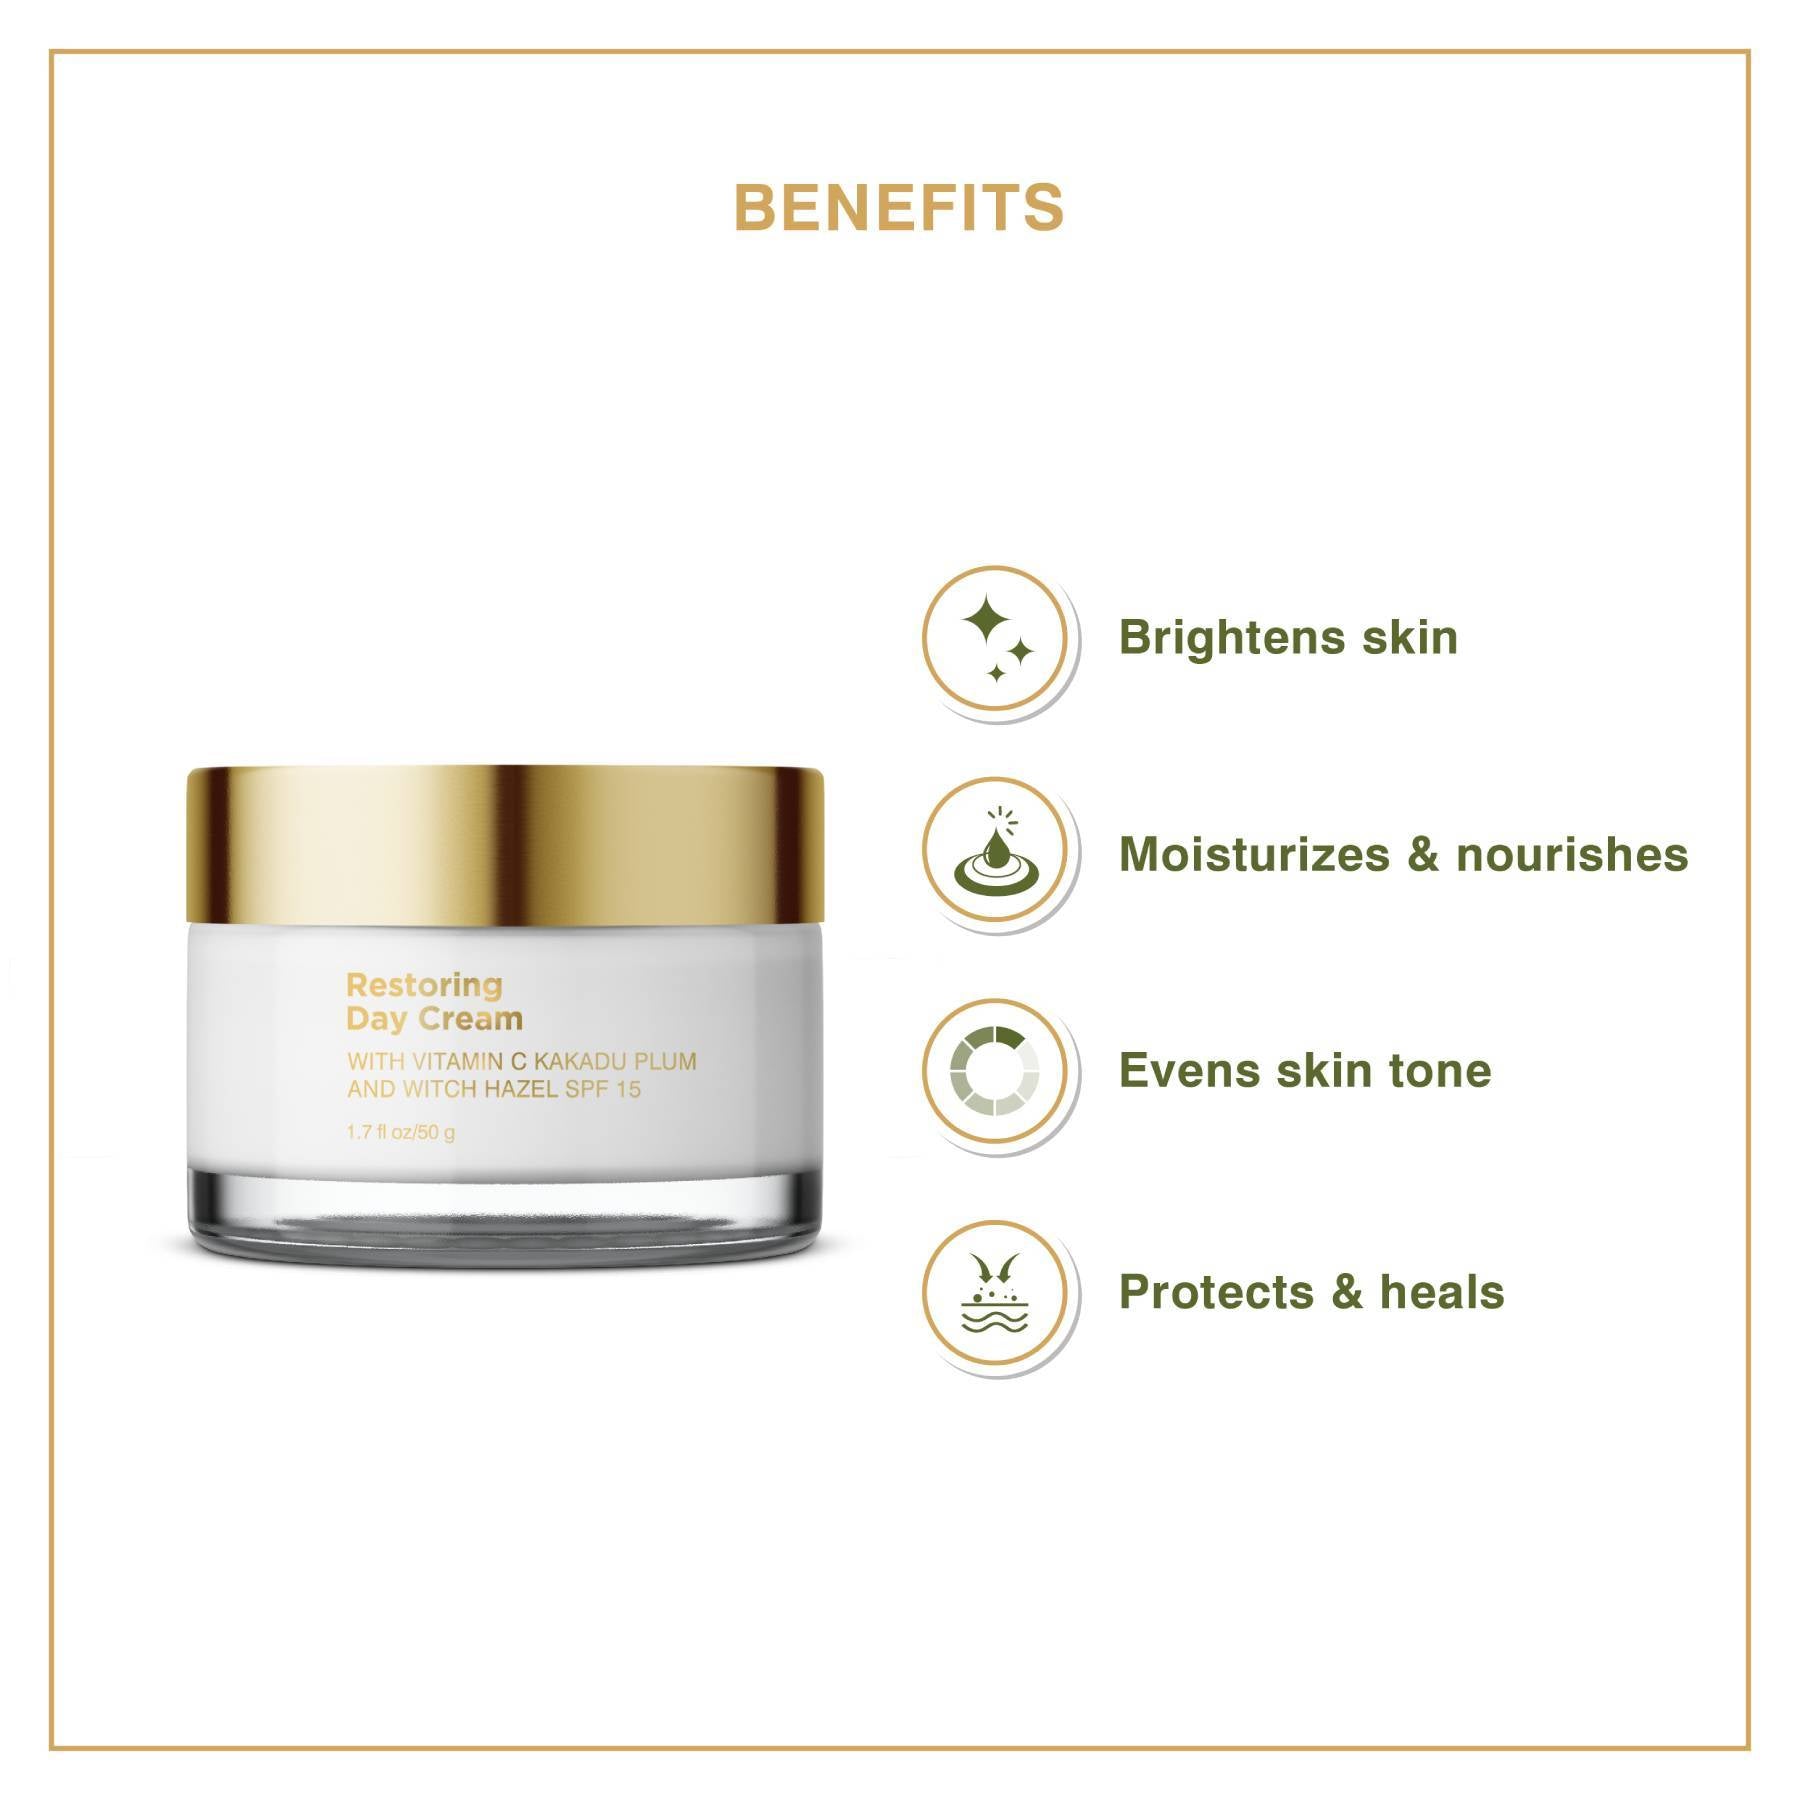 Shop Restoring Day Cream  from Coccoon on SublimeLife.in. Best for protecting your skin and is ant-aging.